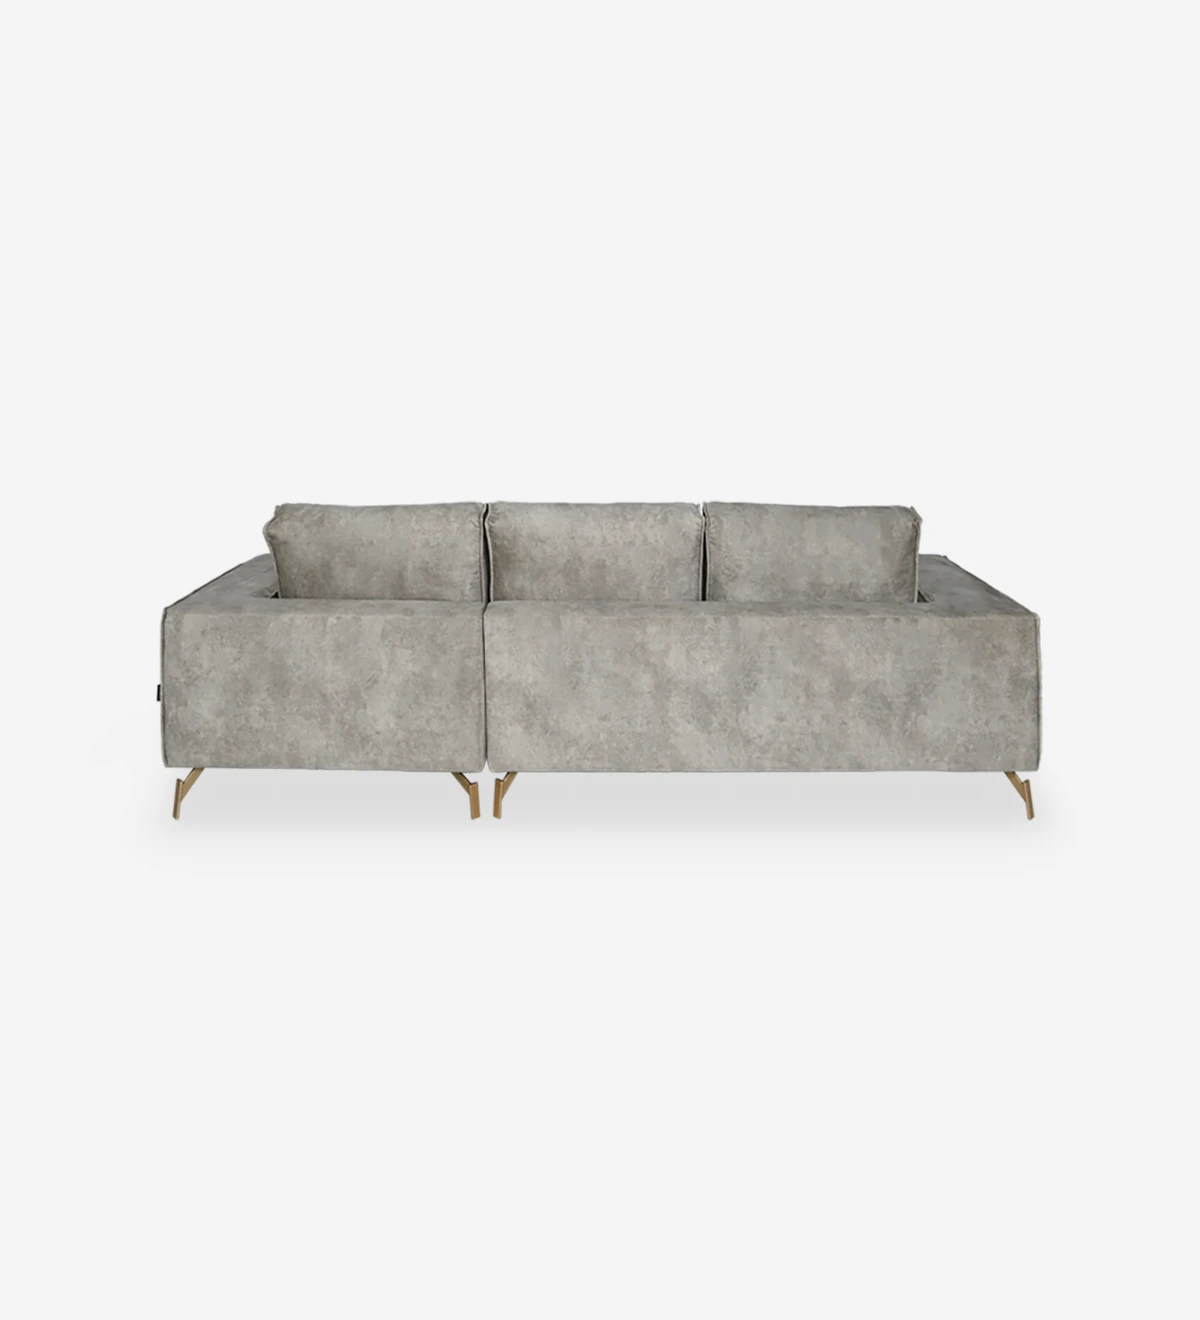 2 Seater sofa, upholstered in fabric with golden lacquered metal feet.